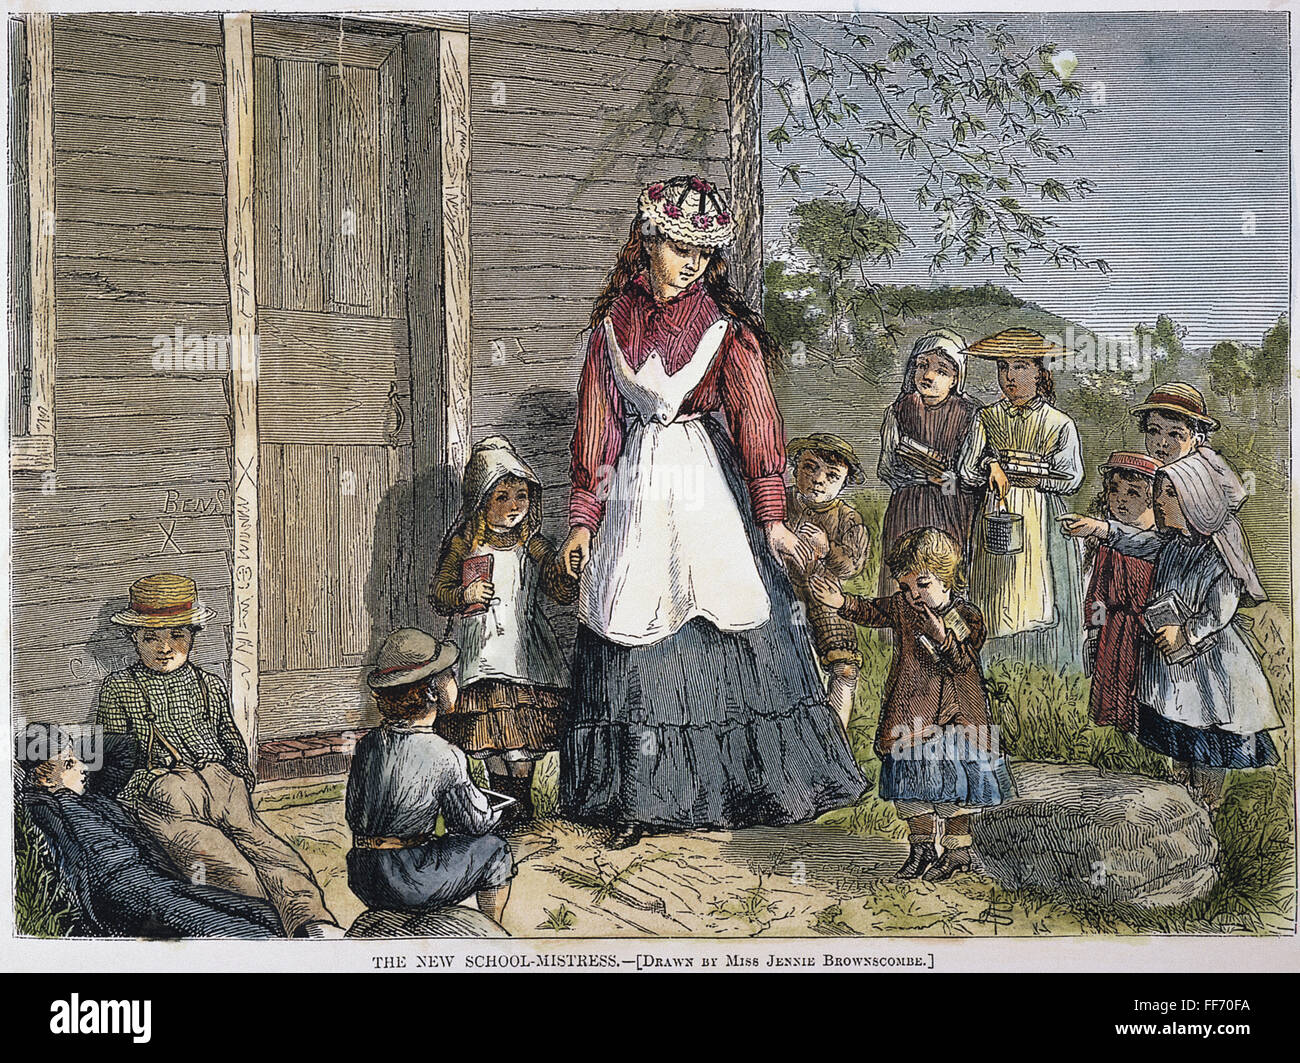 THE NEW SCHOOL MISTRESS. /nAn American country school. Color engraving, 1873. Stock Photo